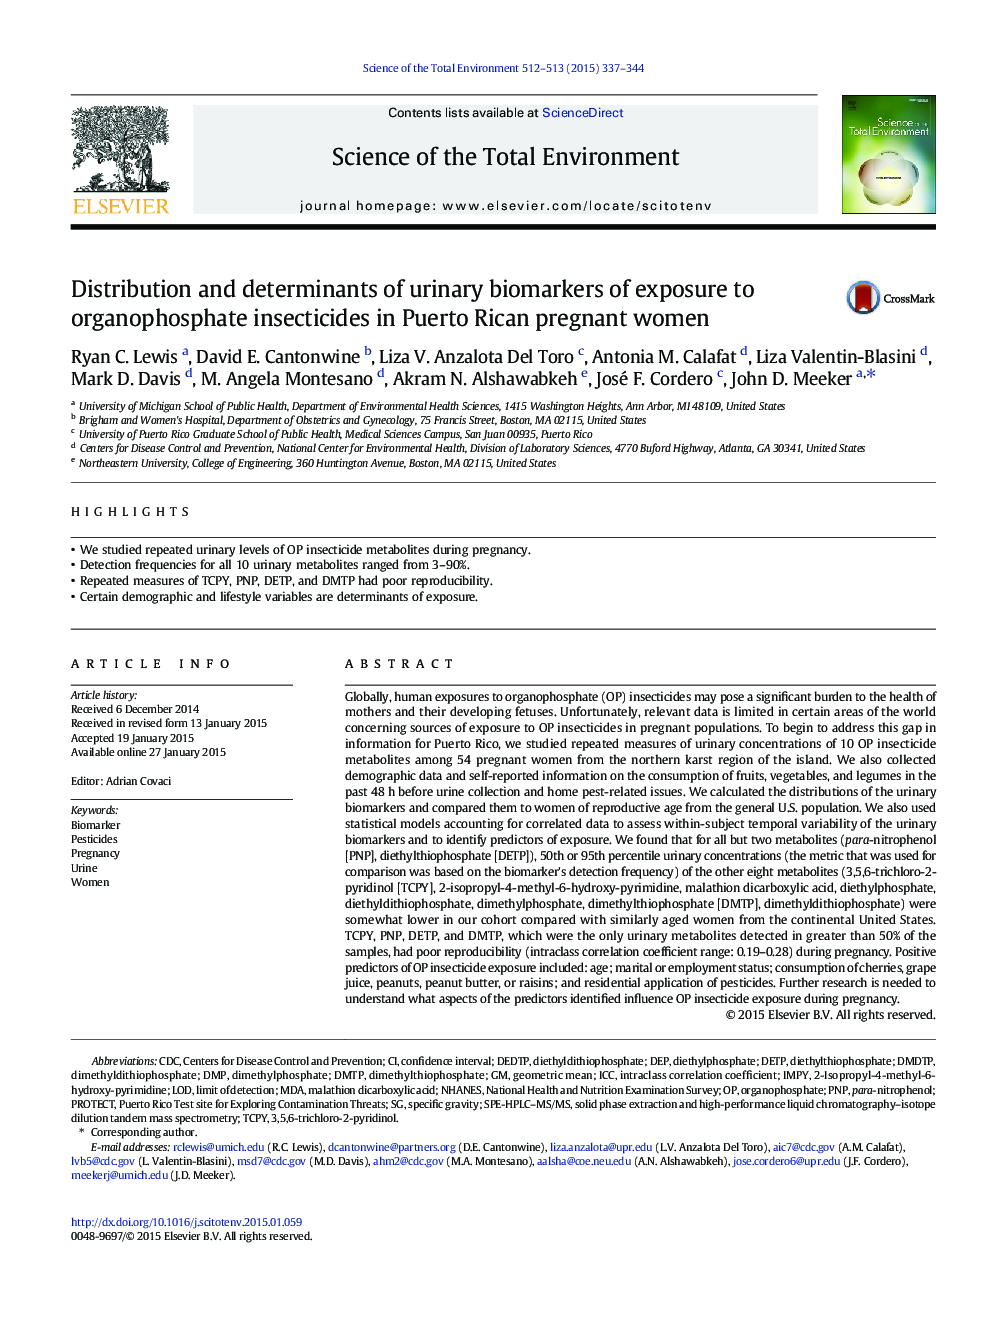 Distribution and determinants of urinary biomarkers of exposure to organophosphate insecticides in Puerto Rican pregnant women